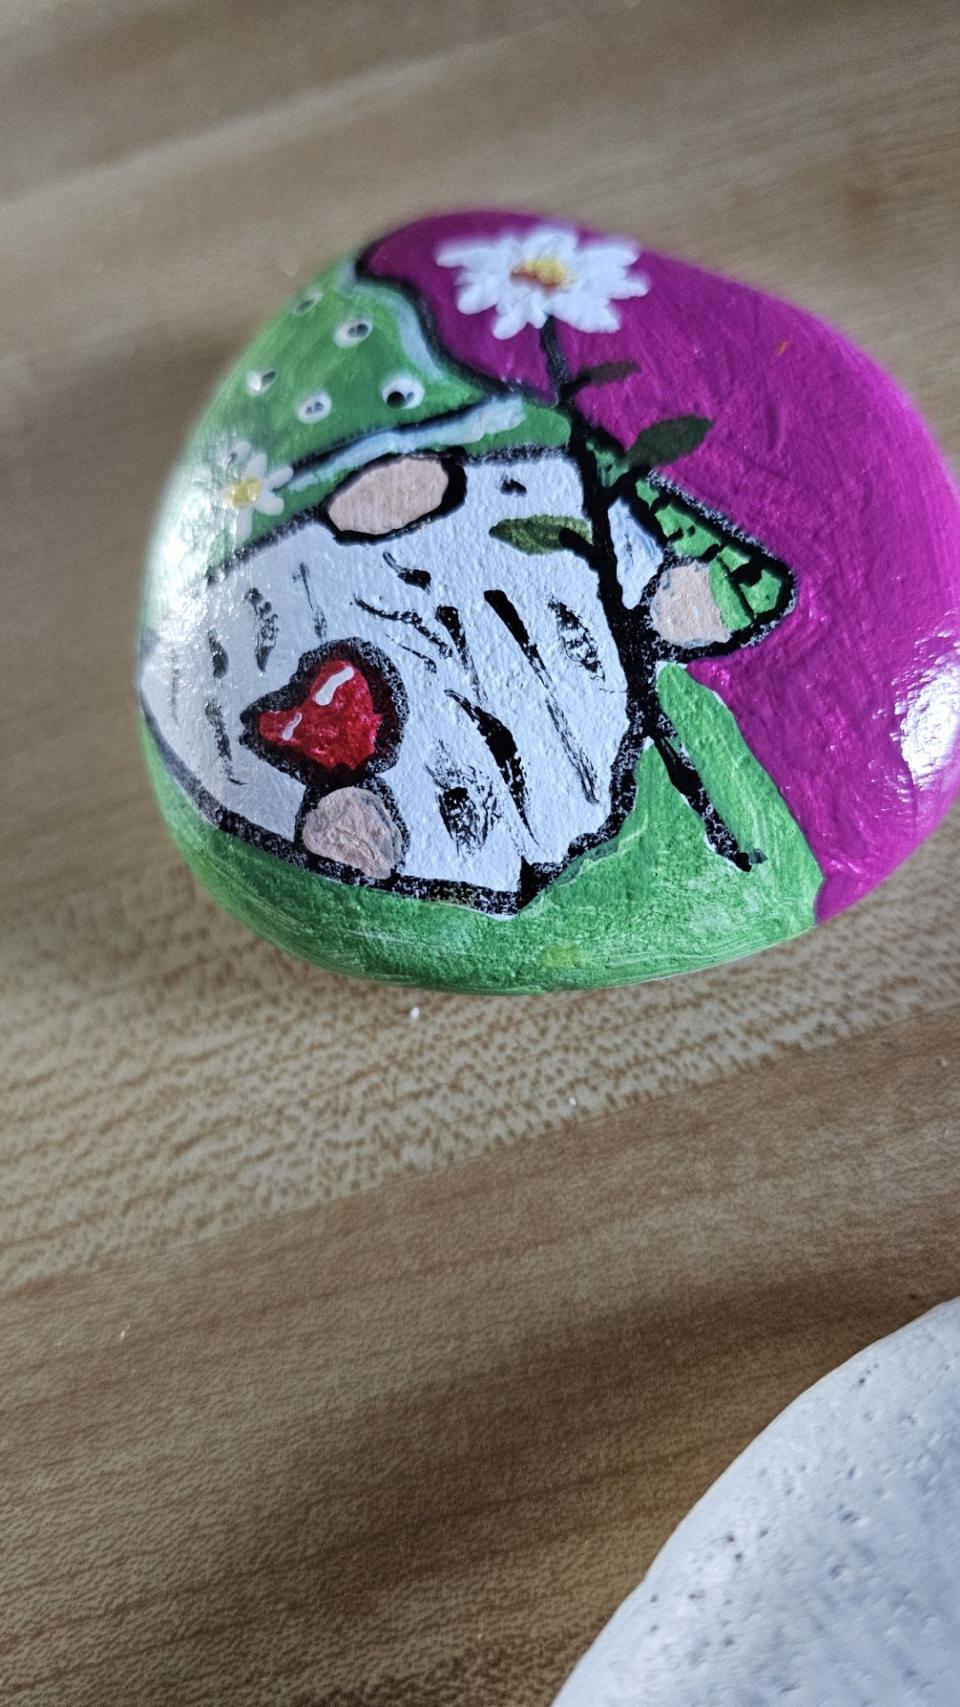 Diane Ford painted several heart-themed rocks, like this one with a gnome, for Valentine's Day.